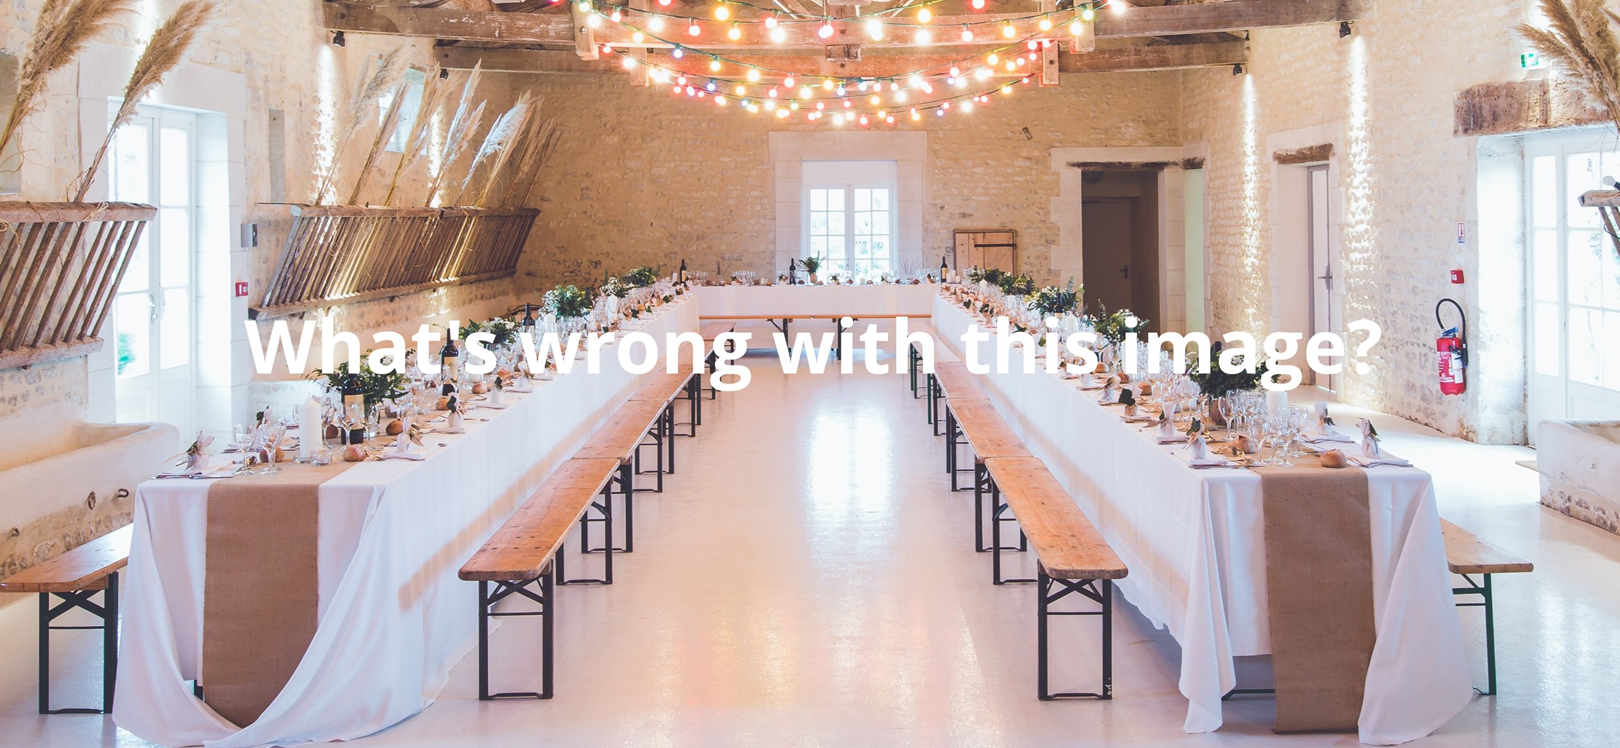 What's wrong with this image? Wedding venue